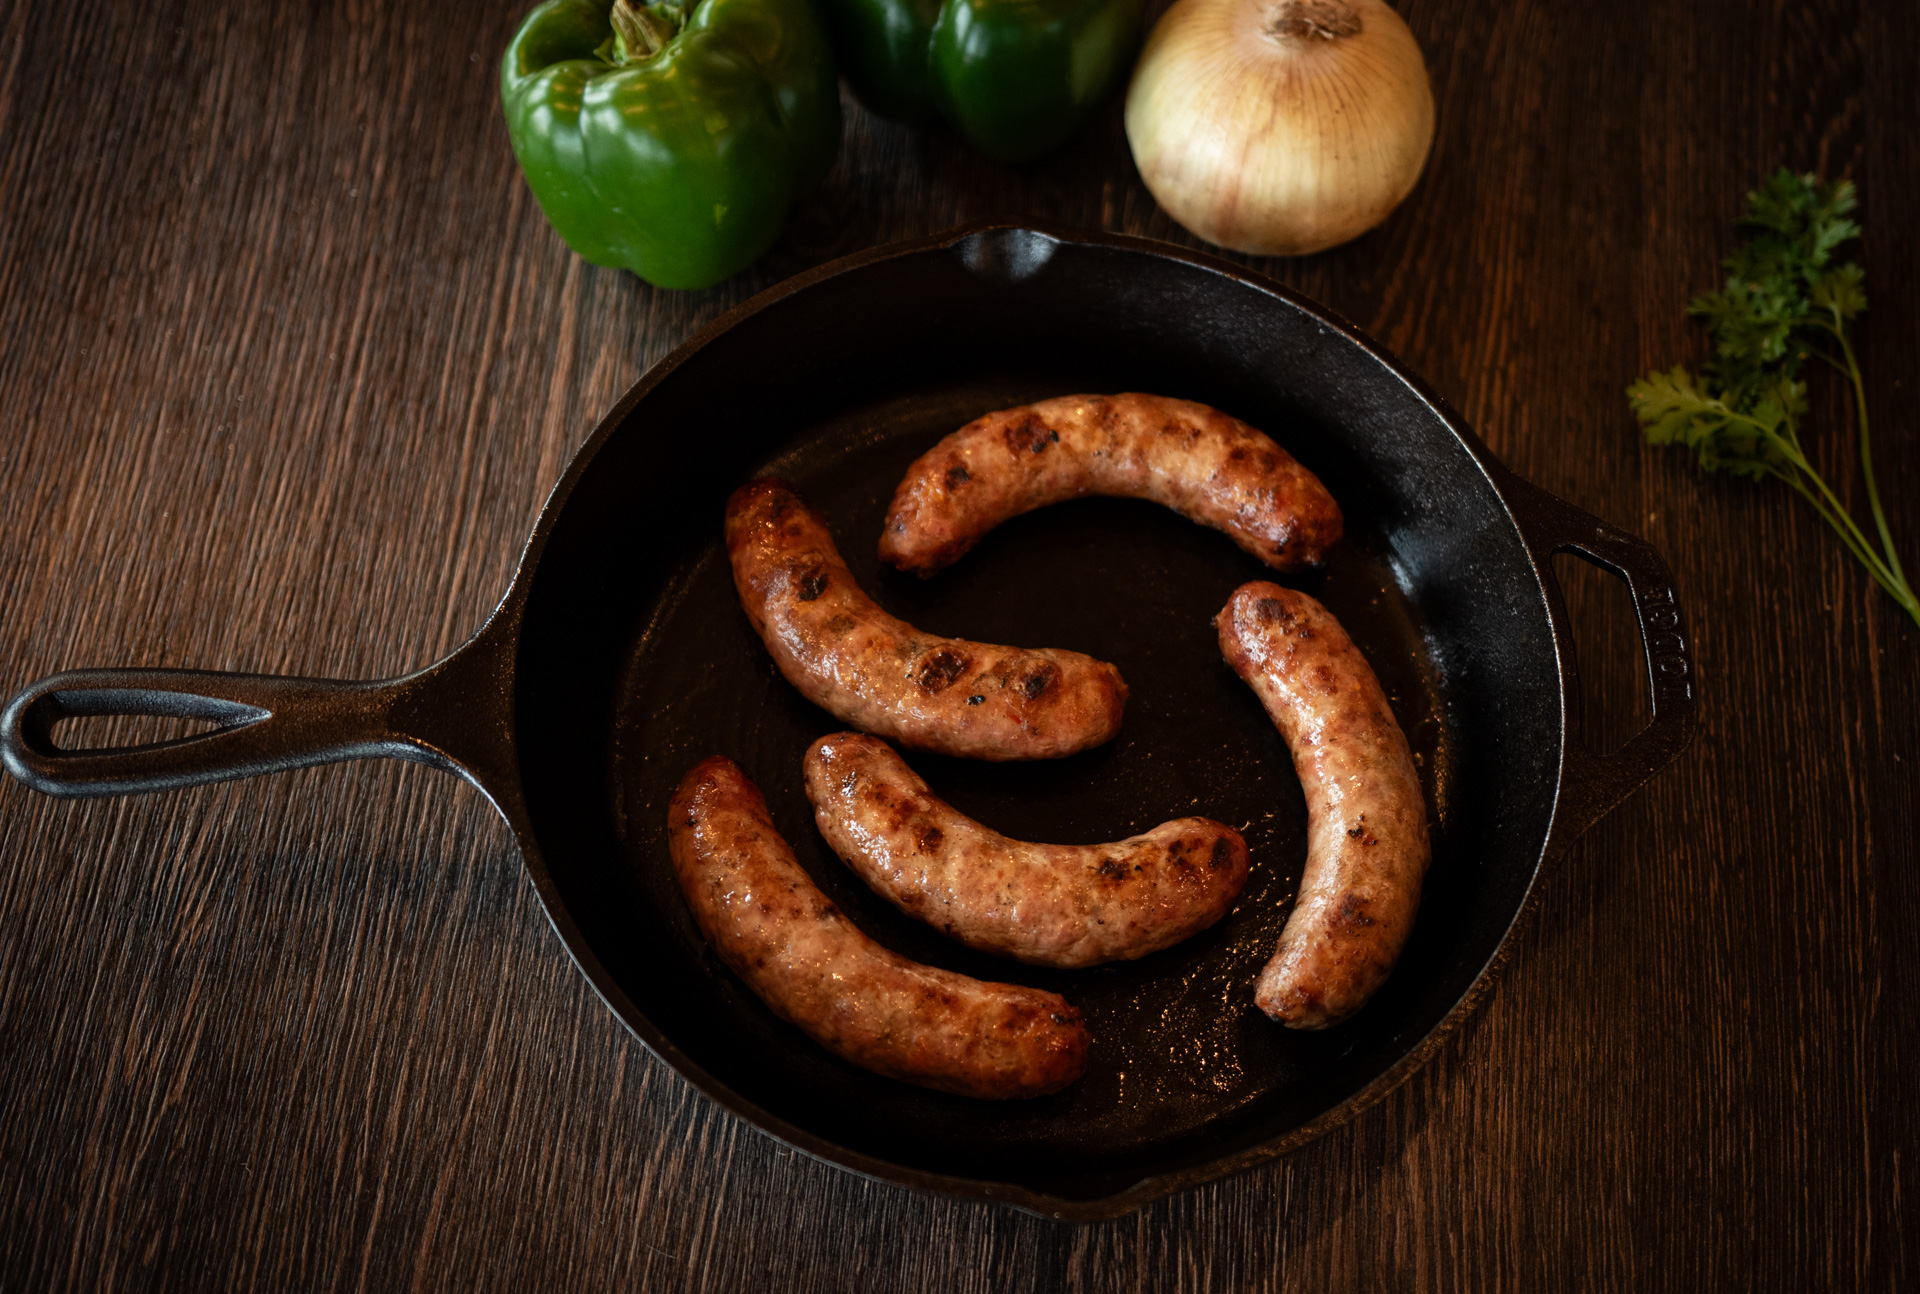 Salmon's Meat Products Italian Sausage available at our retail store, online for shipping and in northeast Wisconsin grocery stores